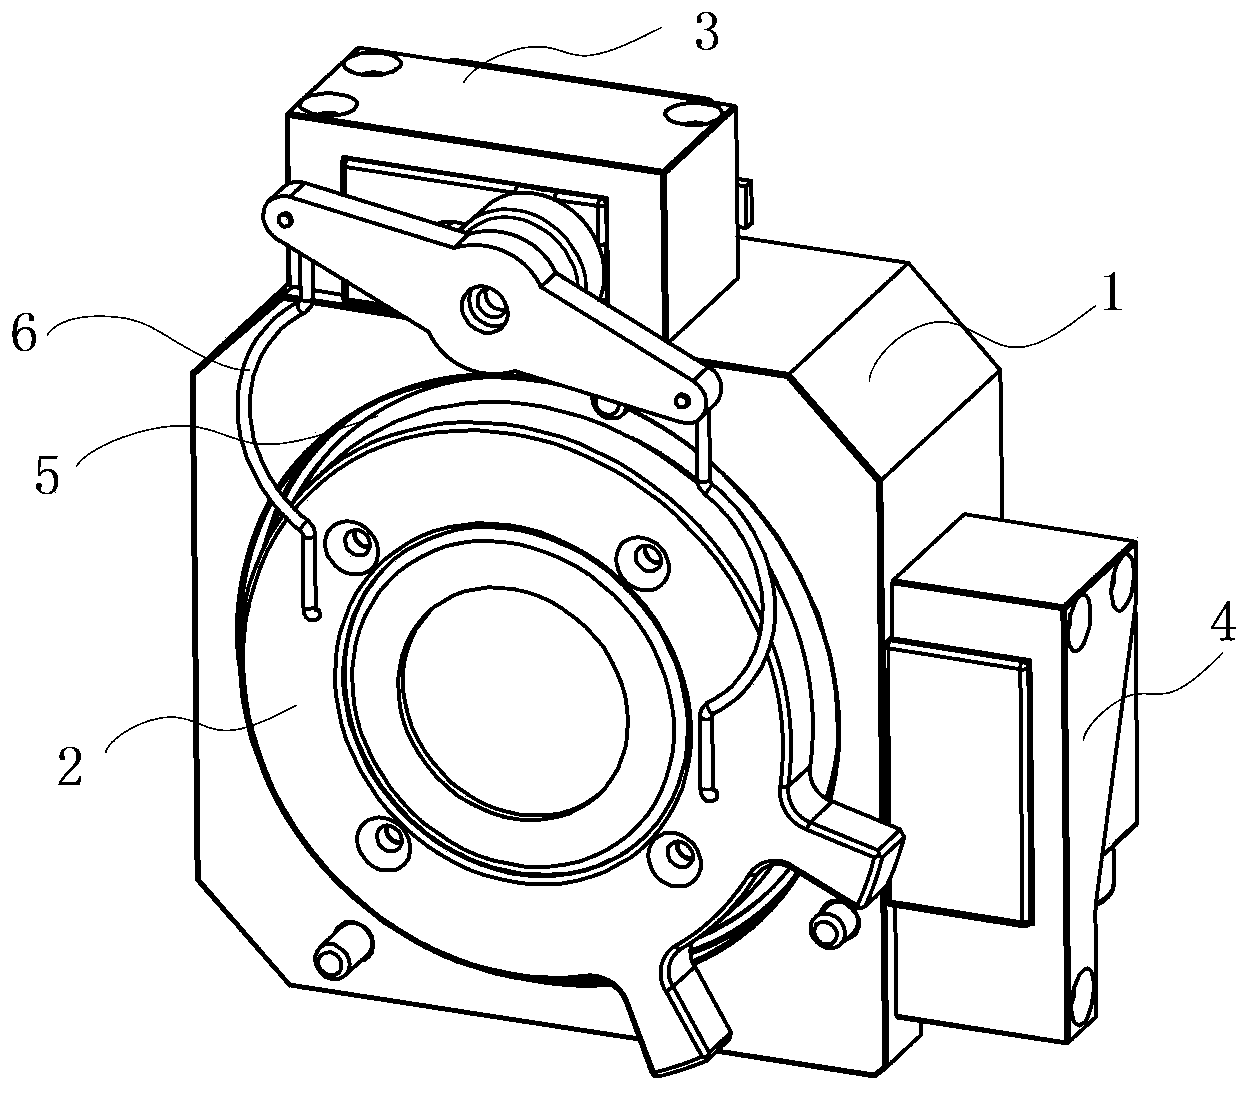 Positioner capable of rotating at multiple angles